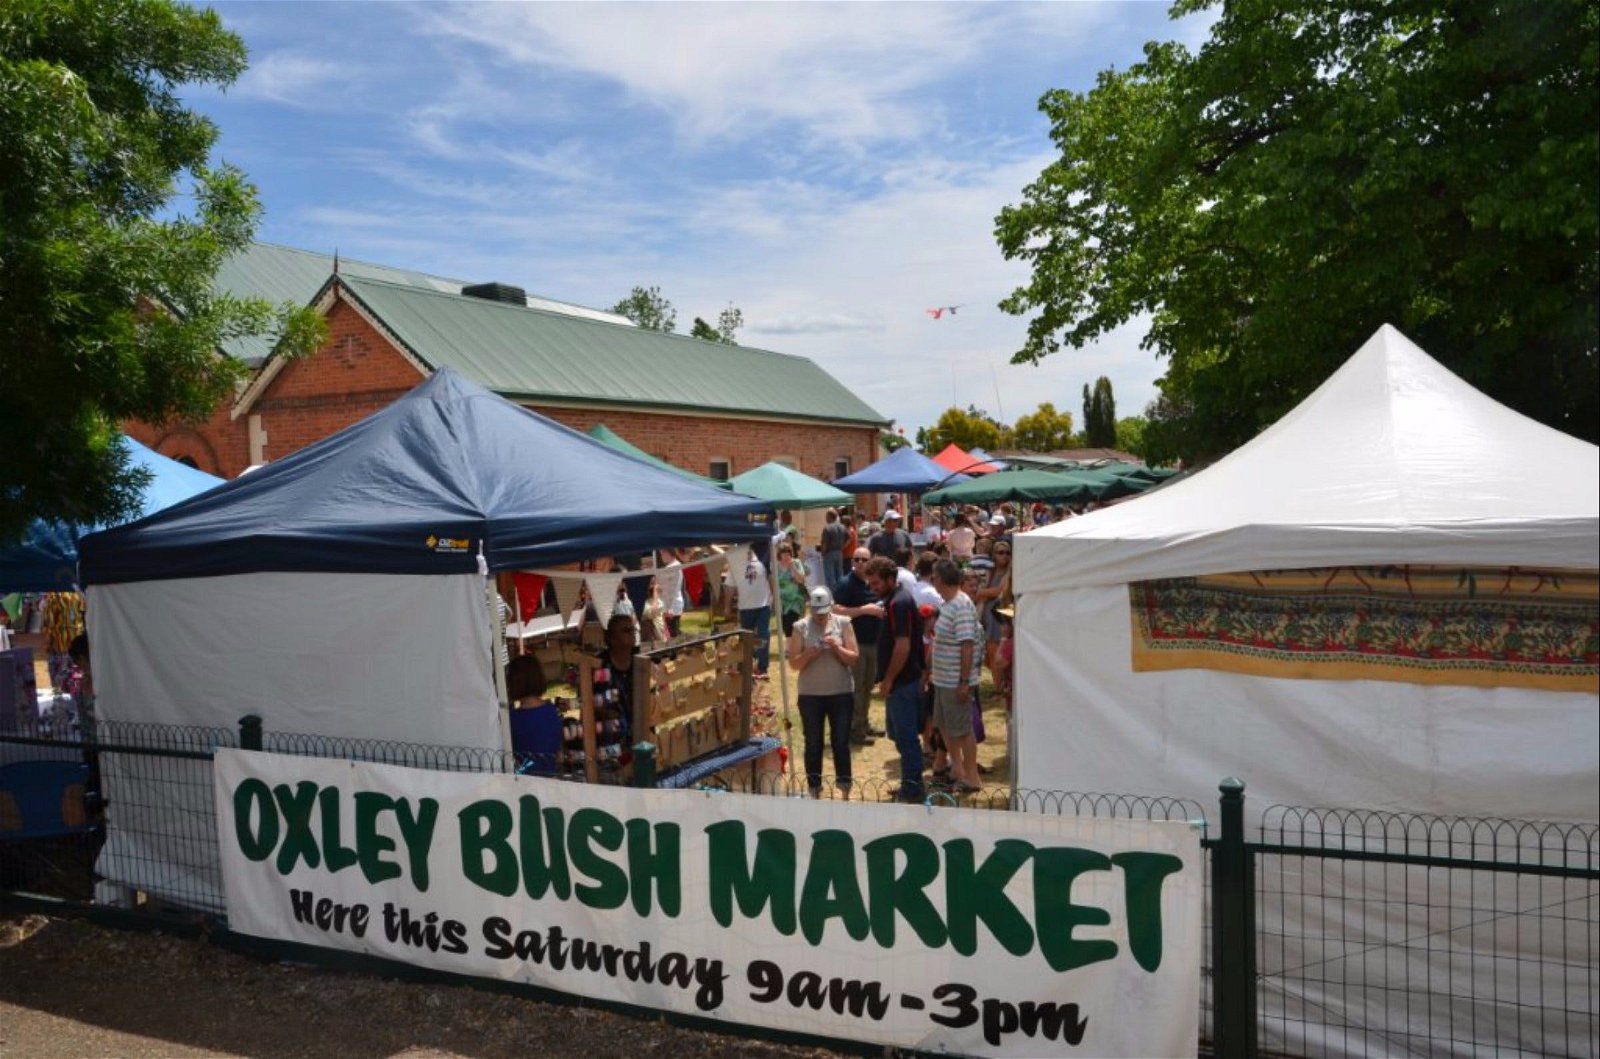 41st Annual Oxley Bush Market Oxley